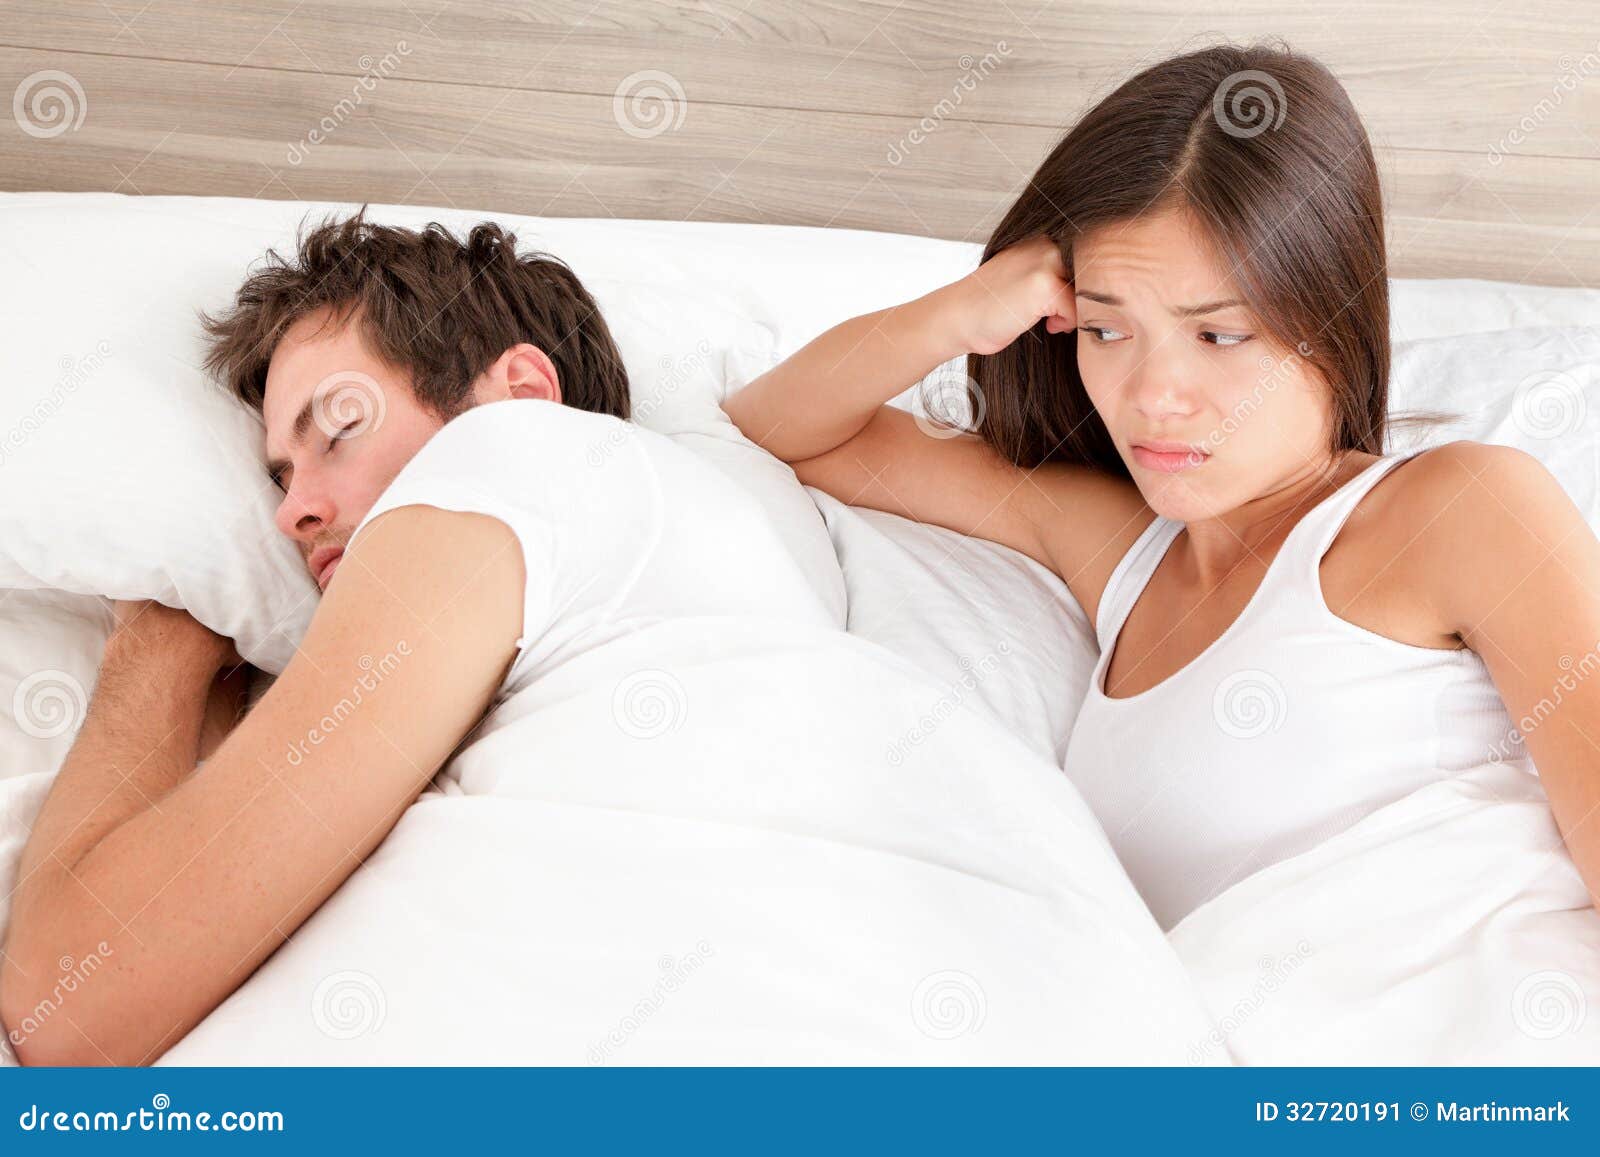 Marriage Couple Marital Problems in Bed Stock Image picture